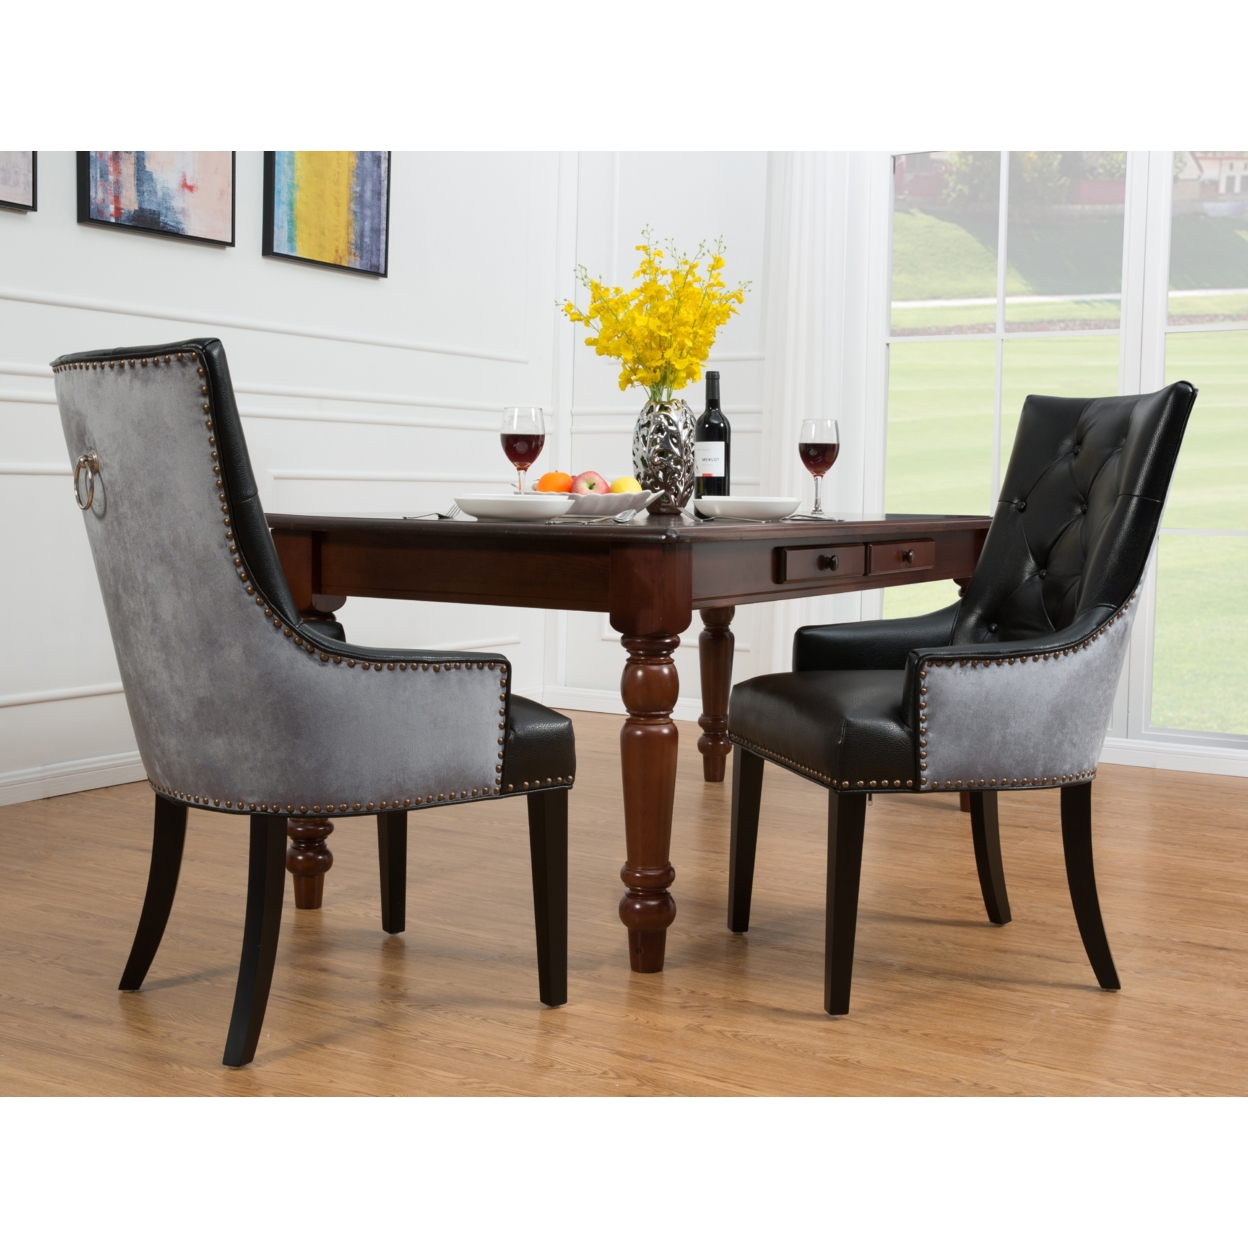 Gideon 2 Pc. Dining Side Chair PU Leather Velvet Polished Brass Nailheads Espresso Finished Wooden Legs - Black